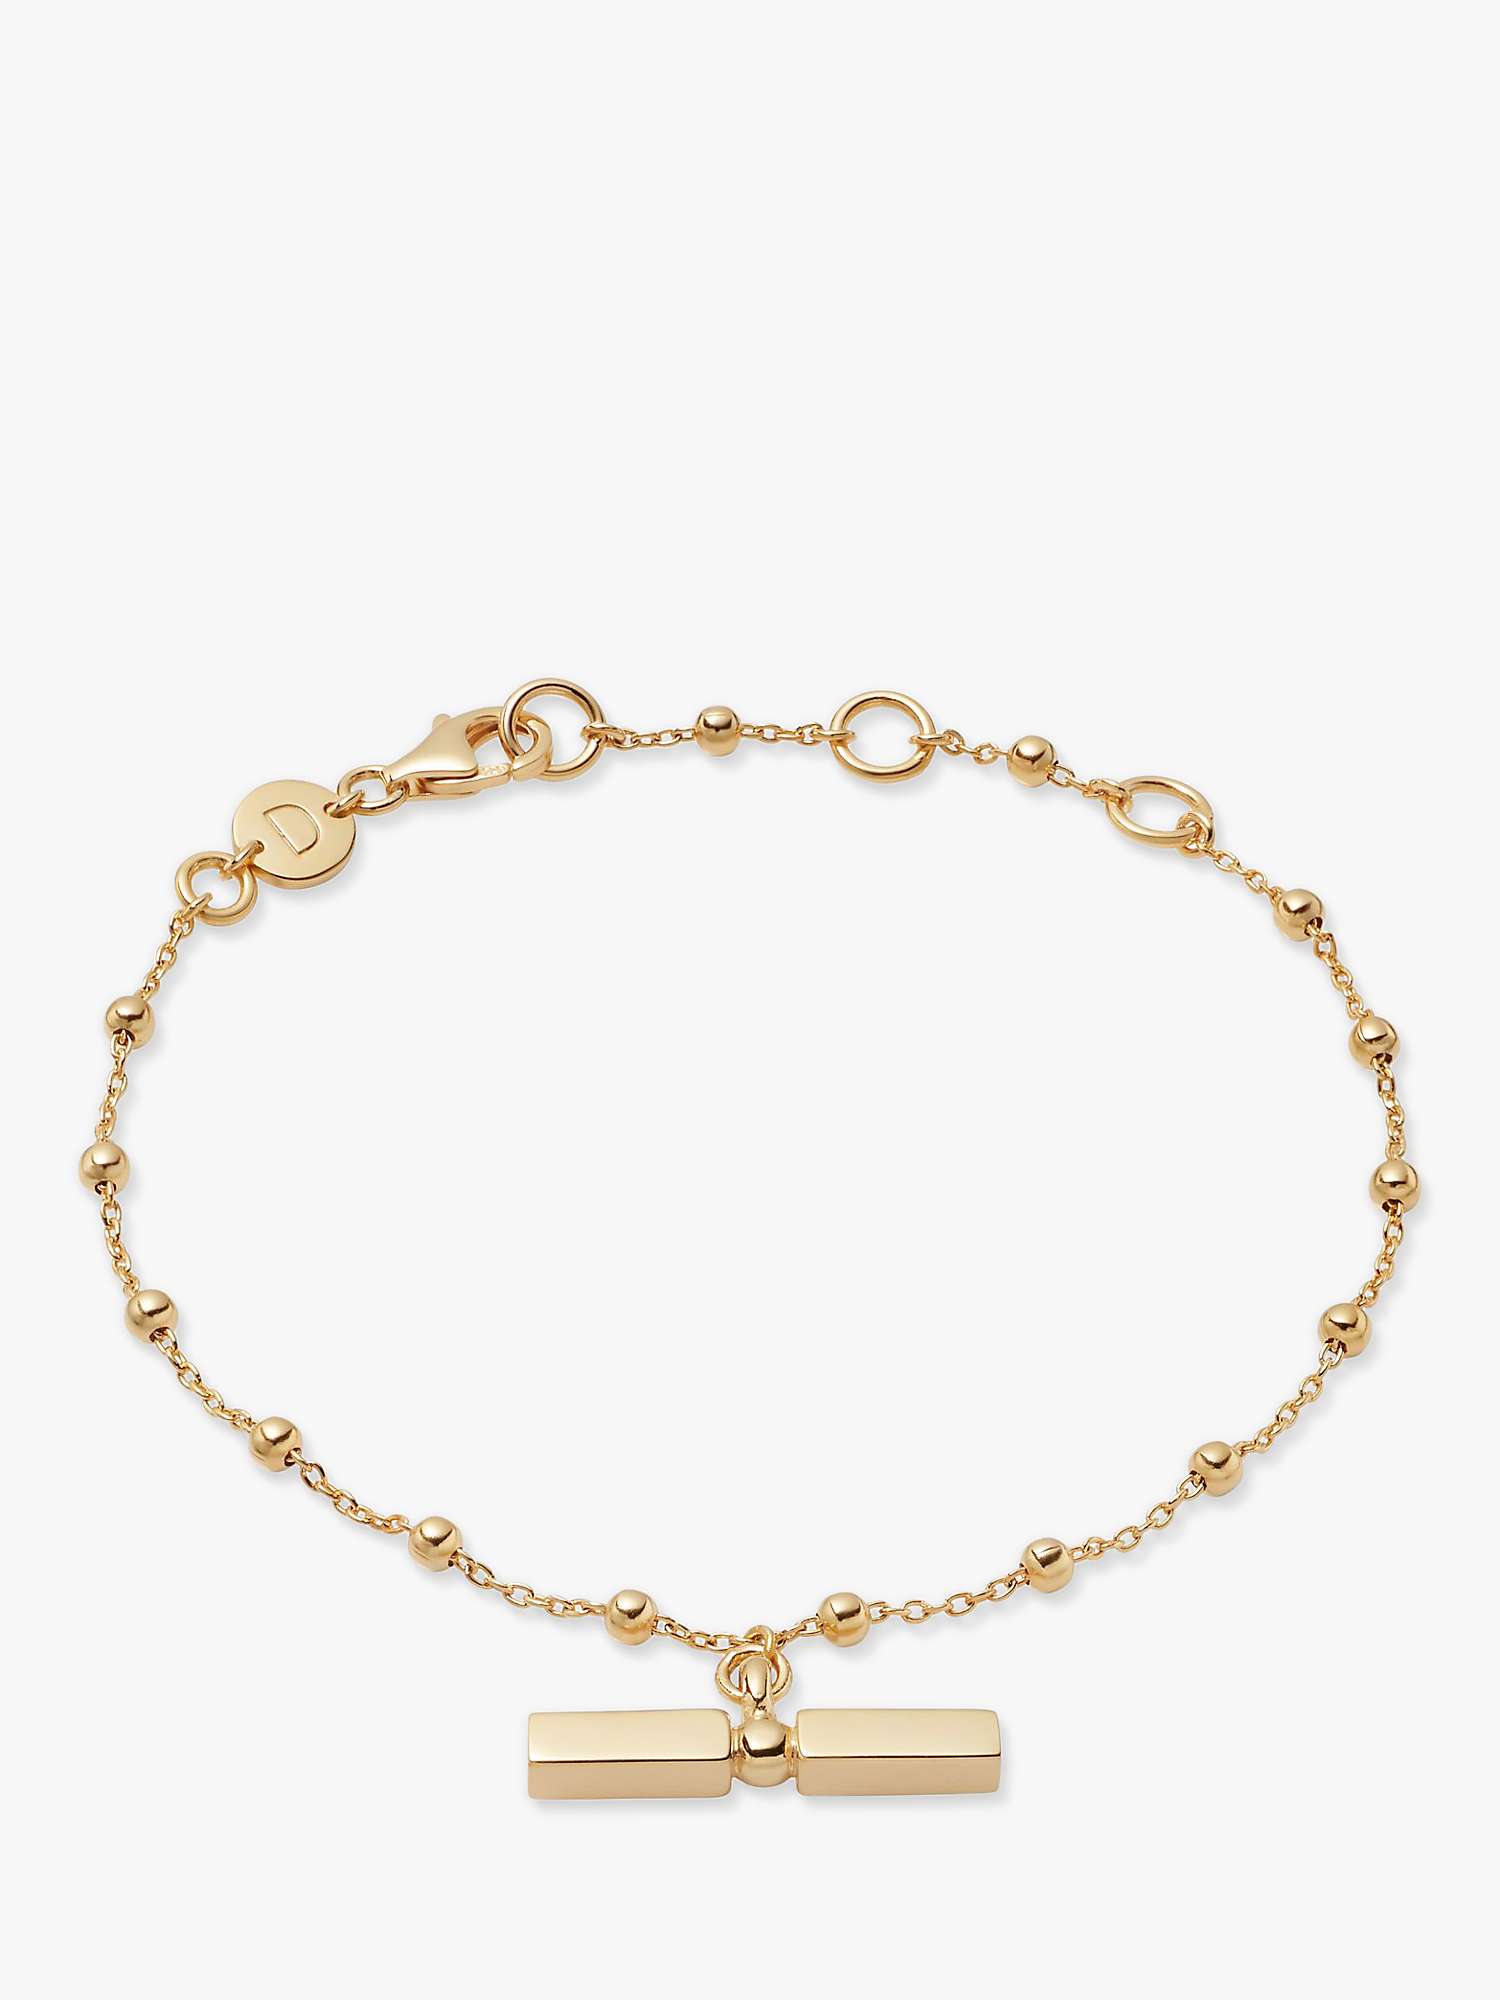 Buy Daisy London Stacked Bead and T Bar Chain Bracelet Online at johnlewis.com